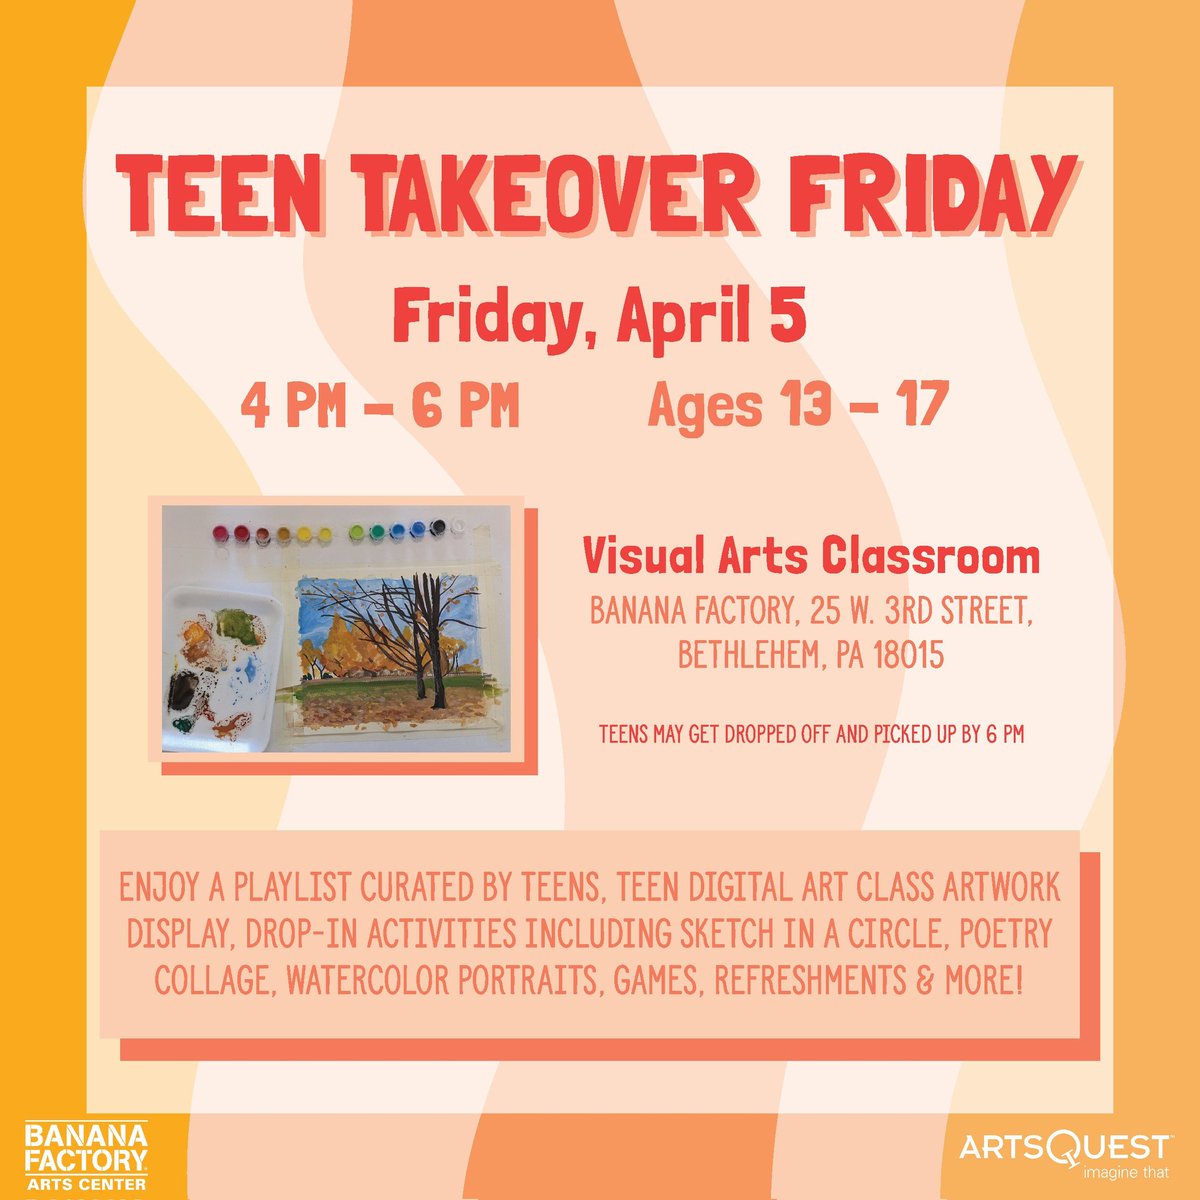 We at @ArtsQuest @BananaFactory are elevating #YouthVoices through our #TeenTakoever program! Giving them a space to be creative, share ideas, and plan their own event 🎨 #TeenTakeoverFriday #youthvoiceweek